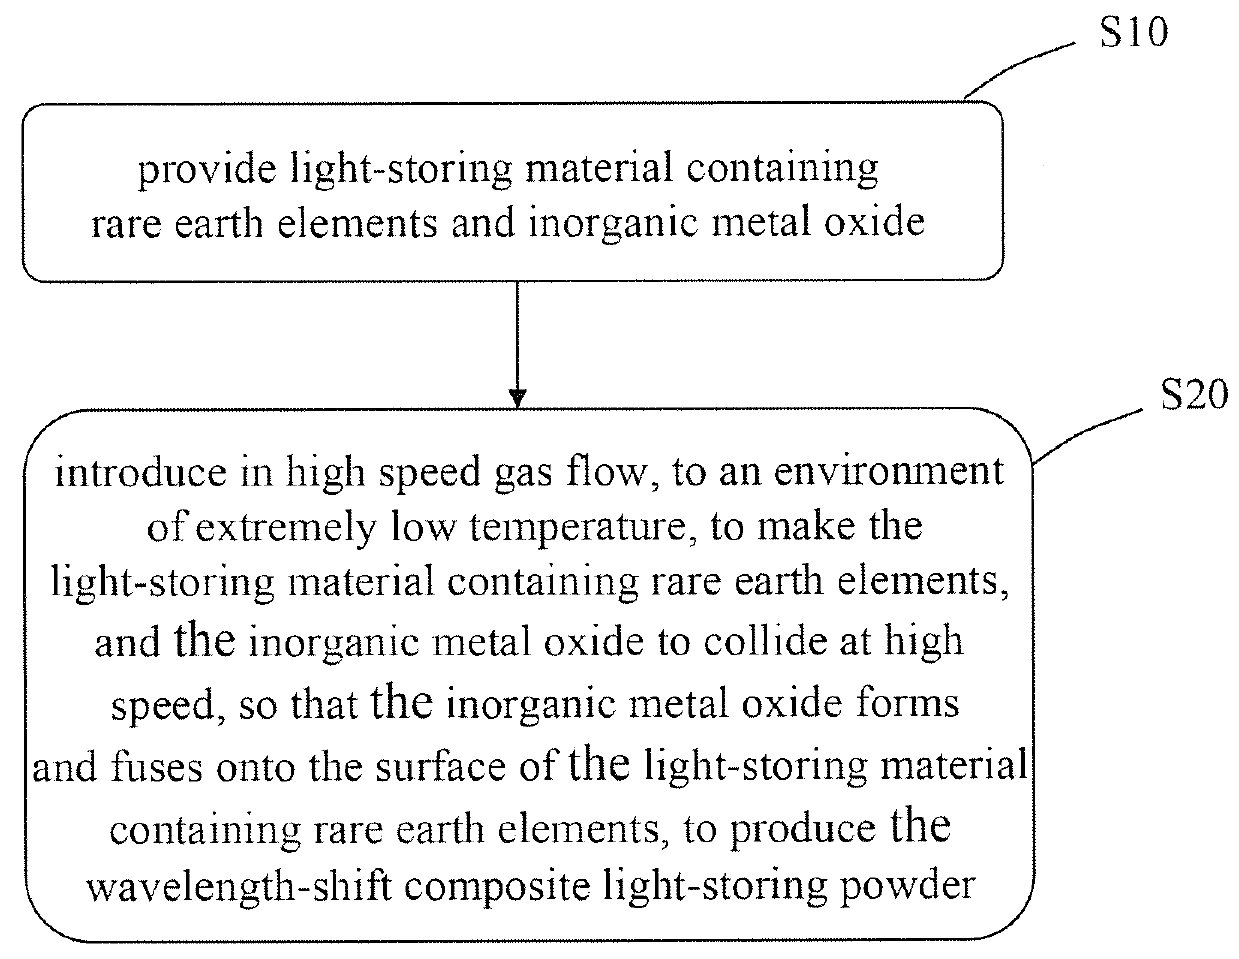 Wavelength-shift composite light-storing powder and method of manufacturing and applying the same